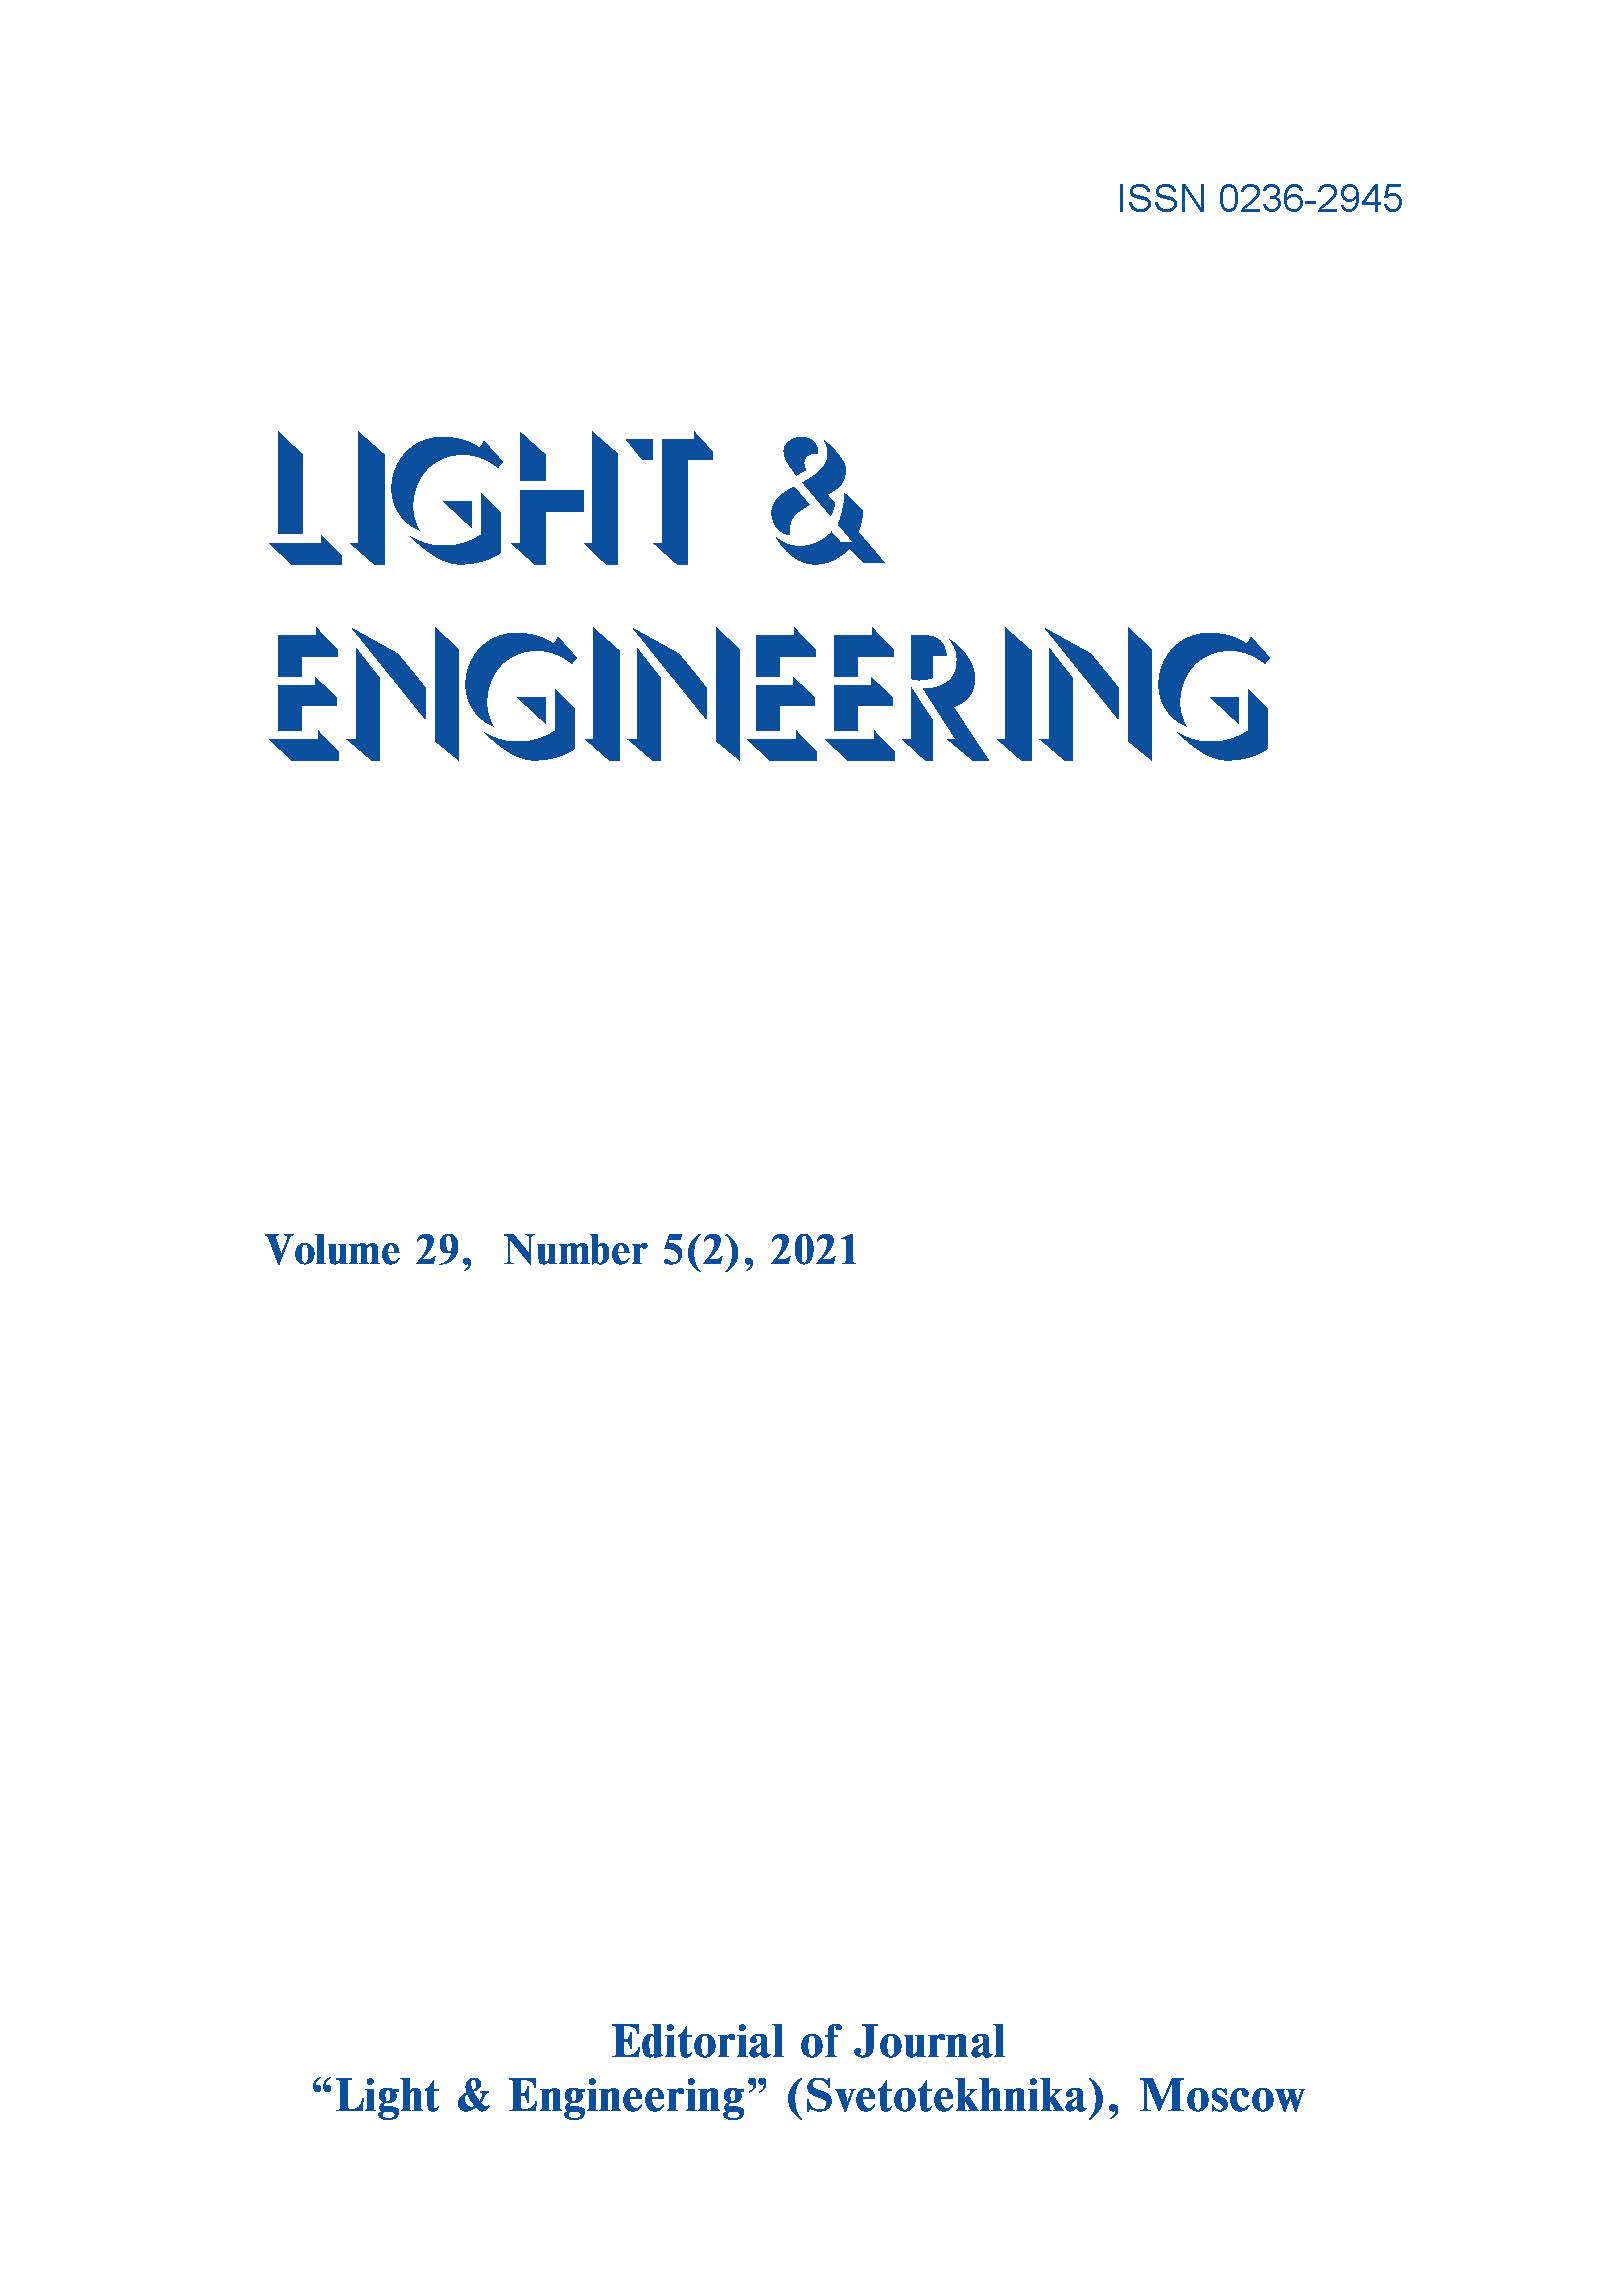 Characteristics of High-Power UV Lamps with Electronnic Ballasts L&E, Vol. 29, No. 5 (2), 2021